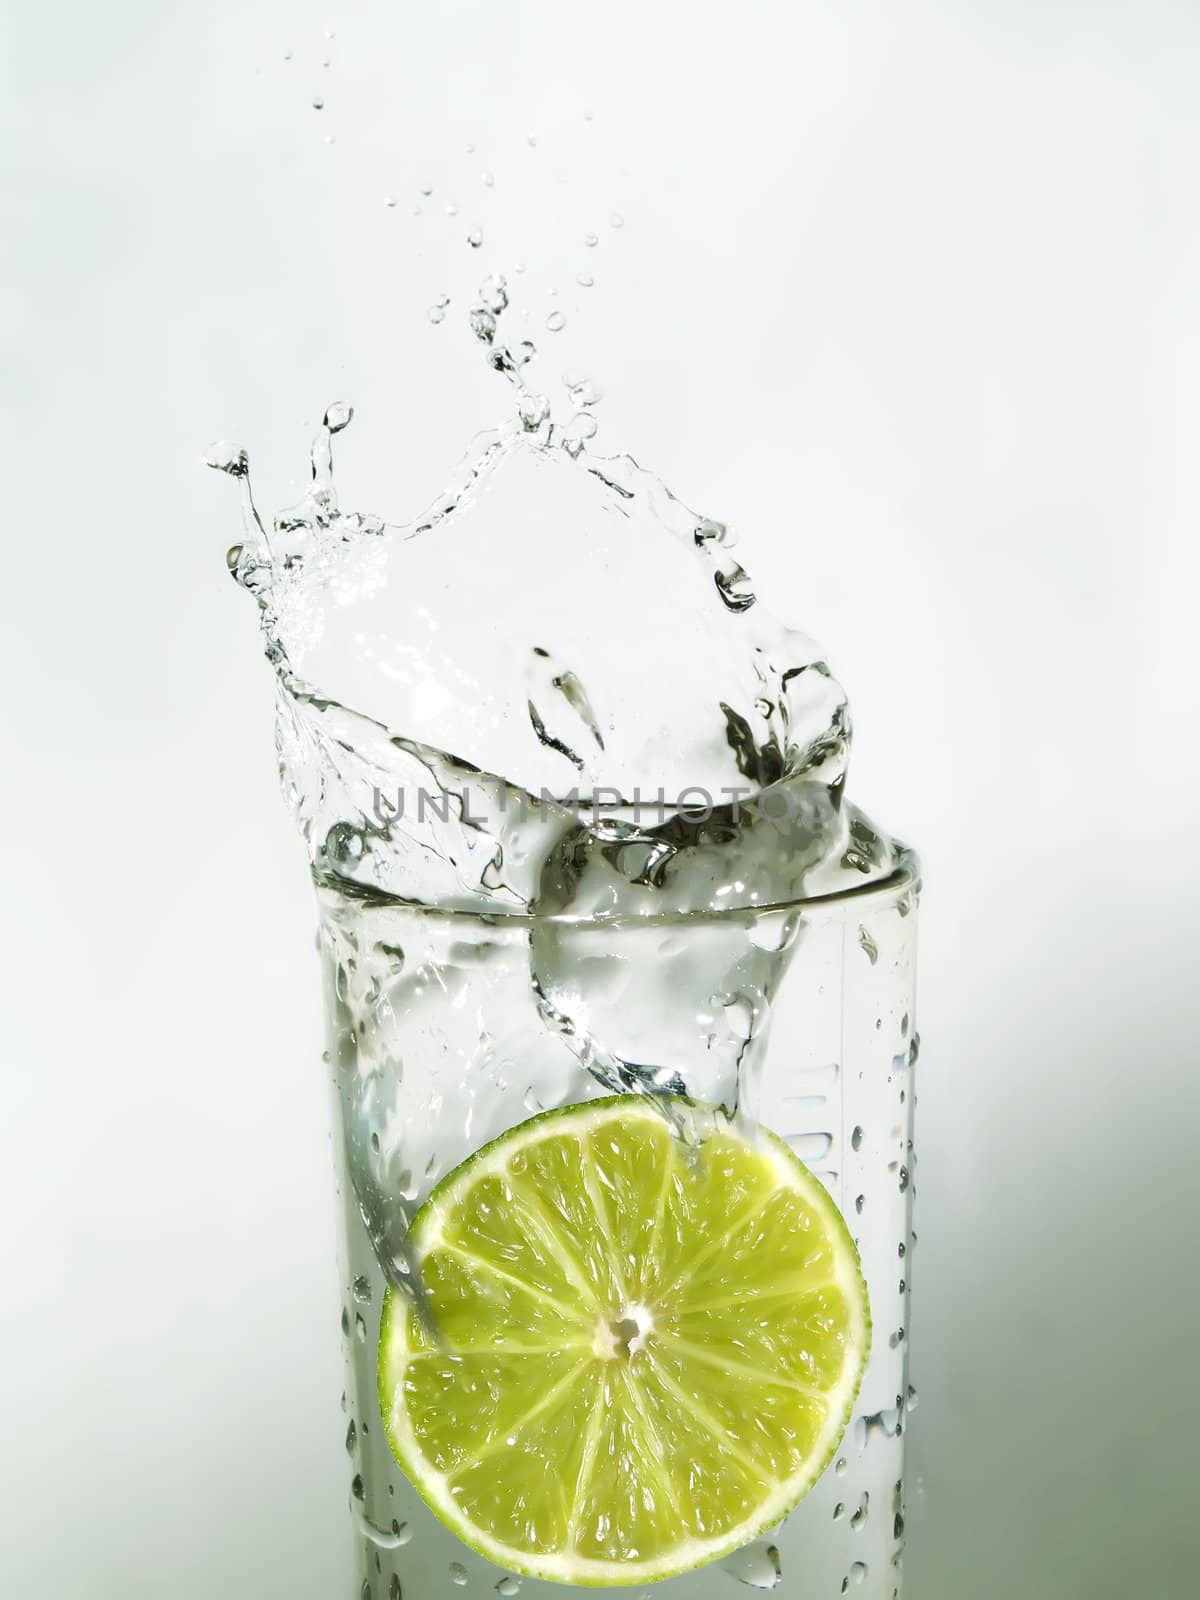 Lime slice in a glass of water